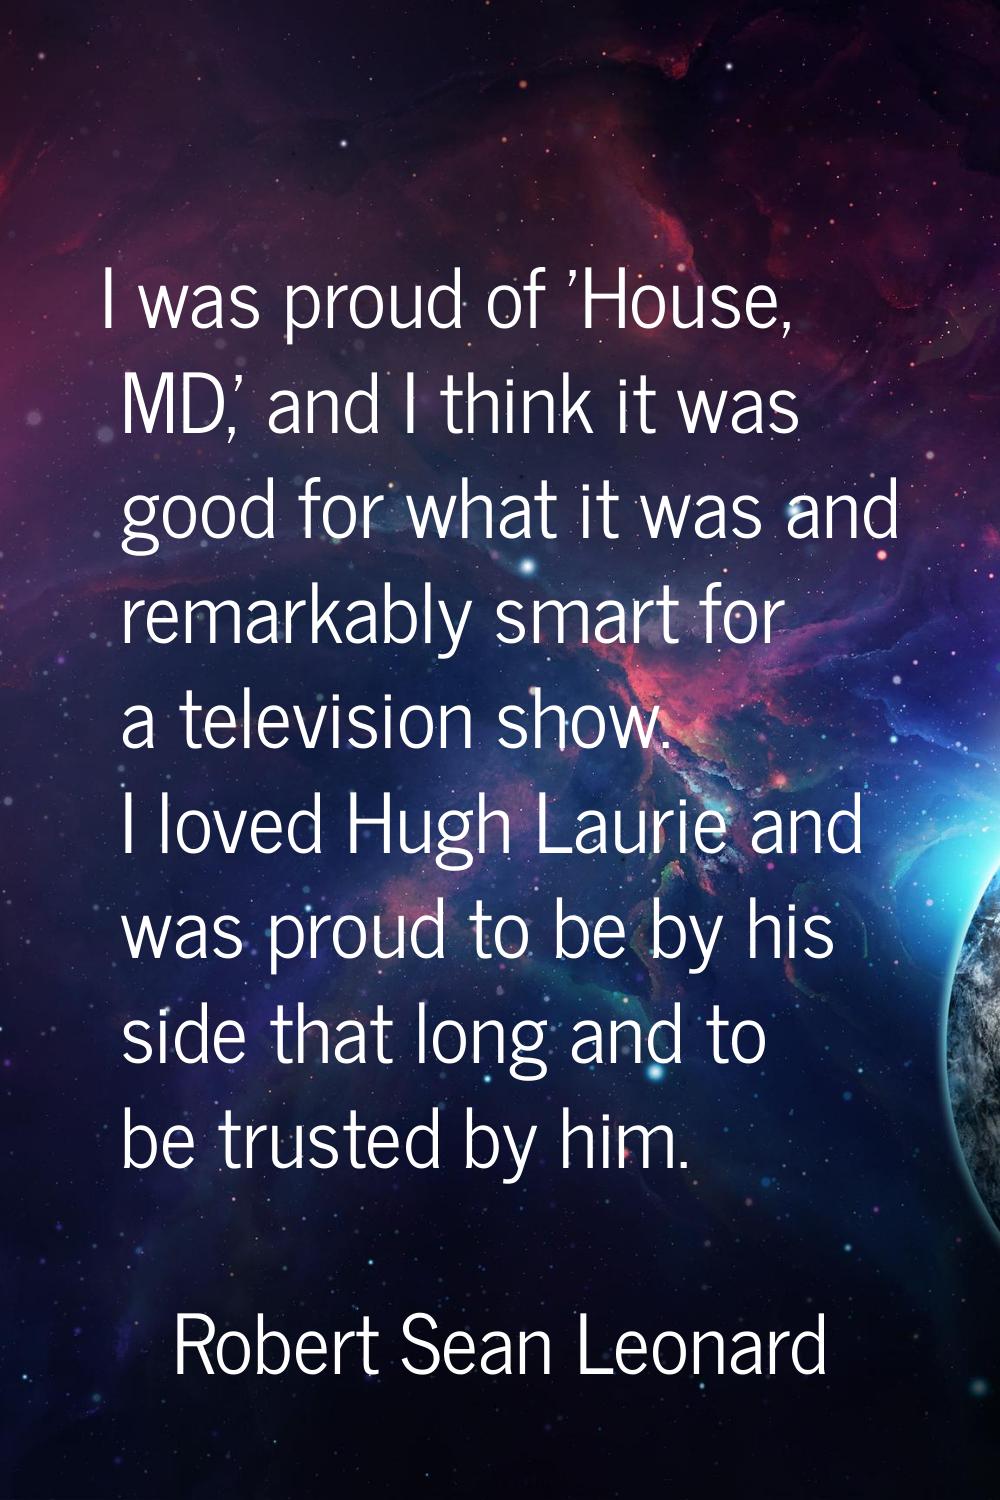 I was proud of 'House, MD,' and I think it was good for what it was and remarkably smart for a tele